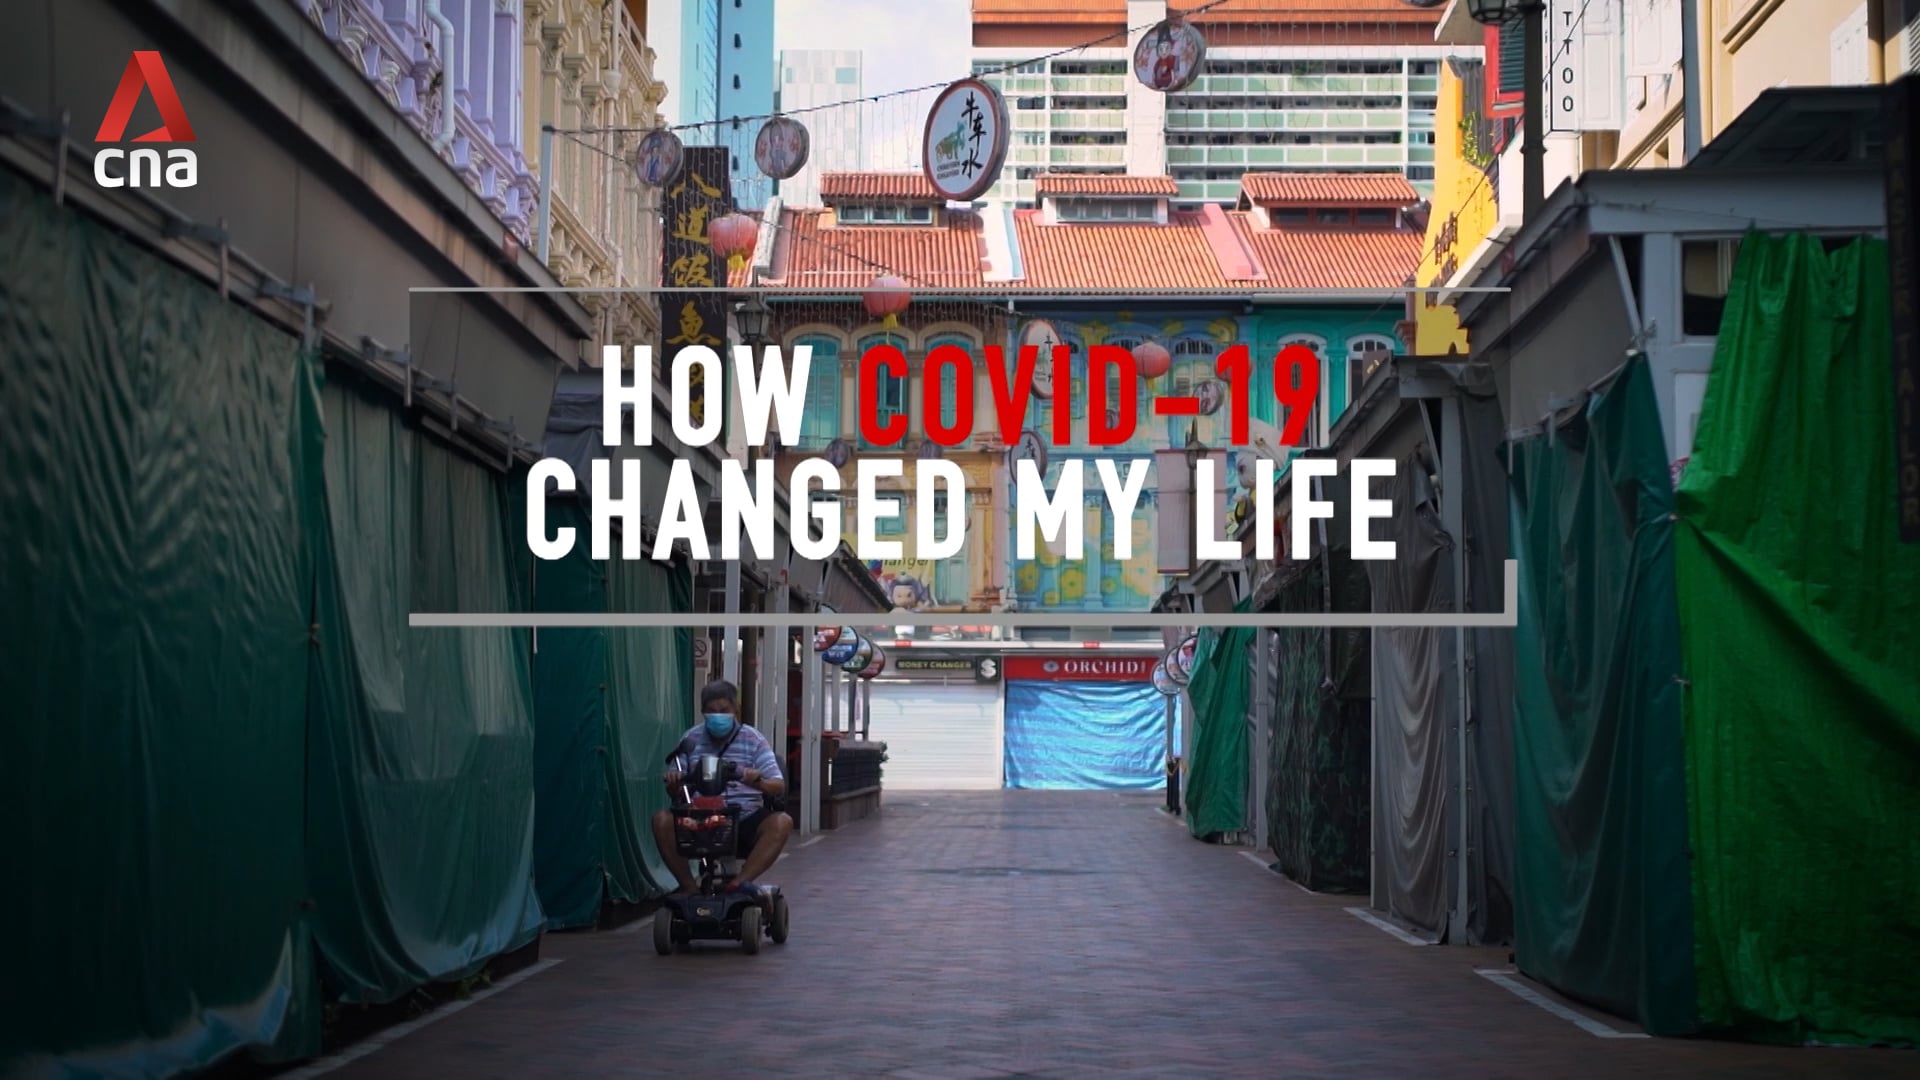 On The Red Dot: How Covid-19 Changed My Life